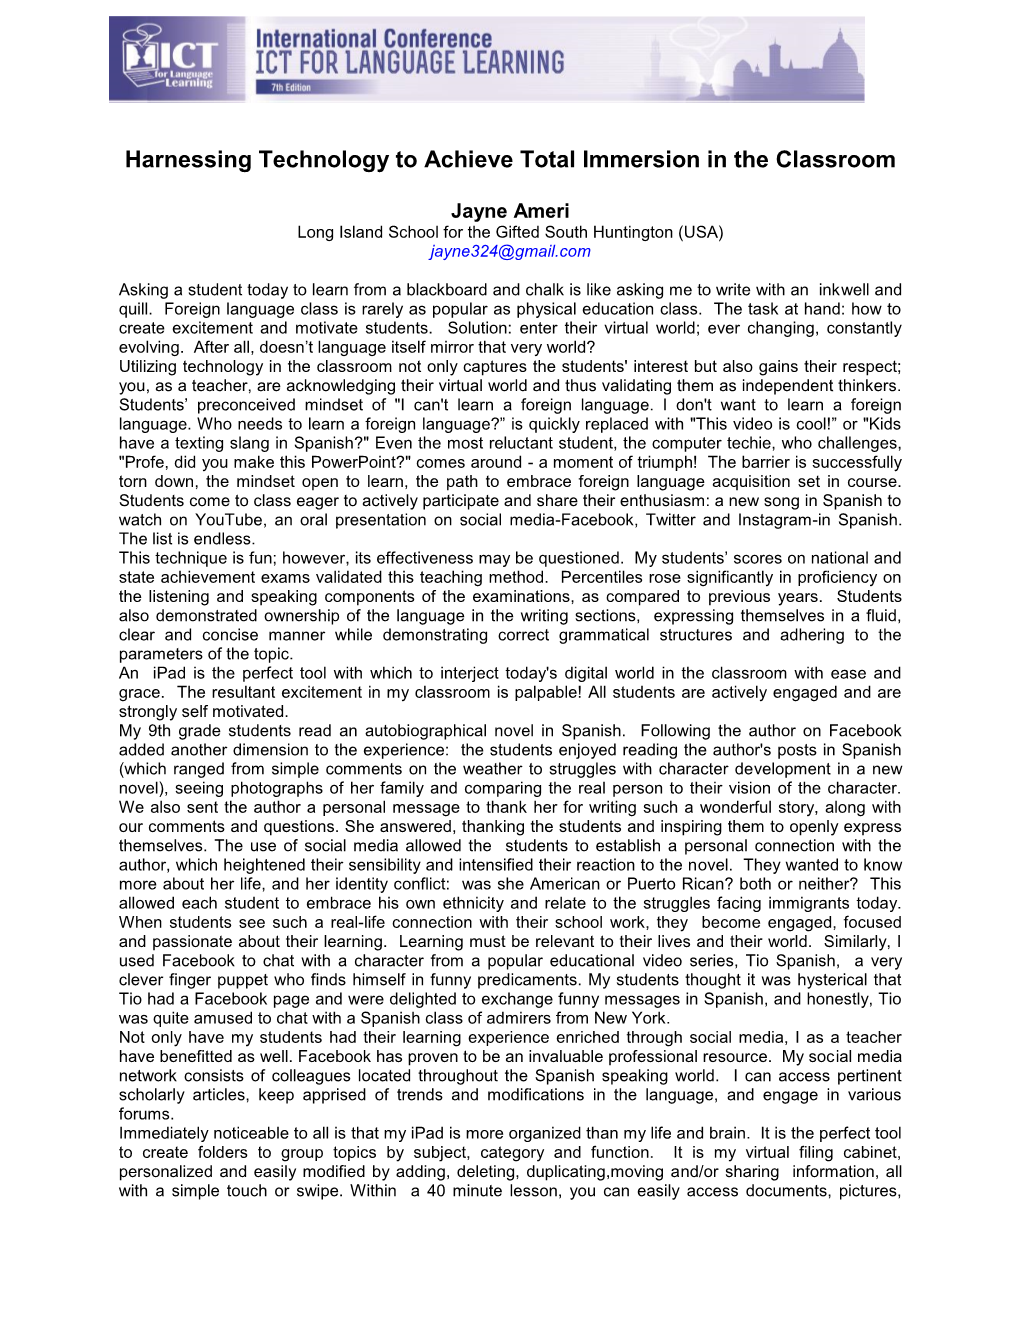 Harnessing Technology to Achieve Total Immersion in the Classroom